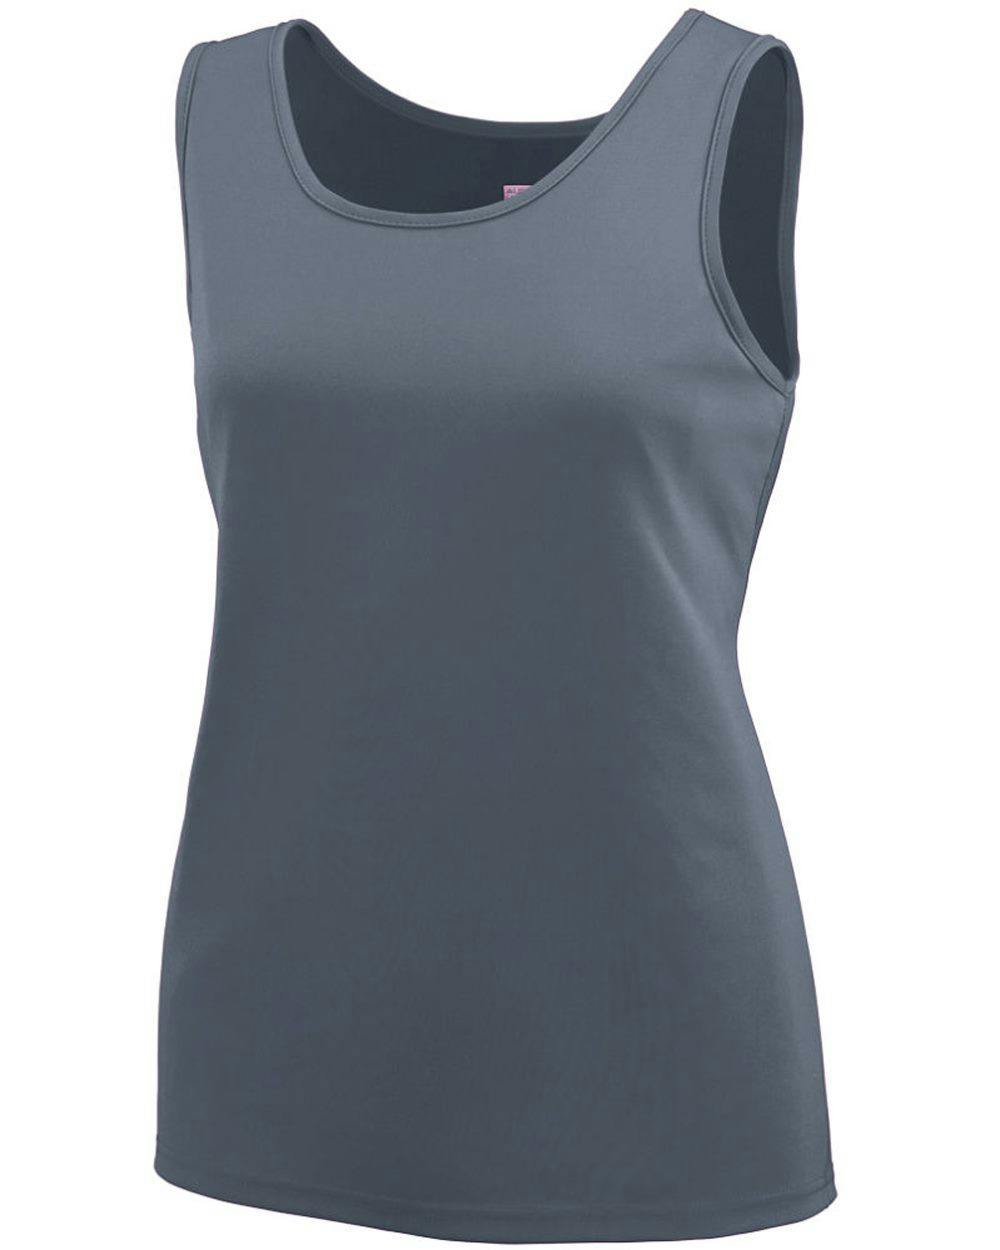 Image for Women's Training Tank Top - 1705